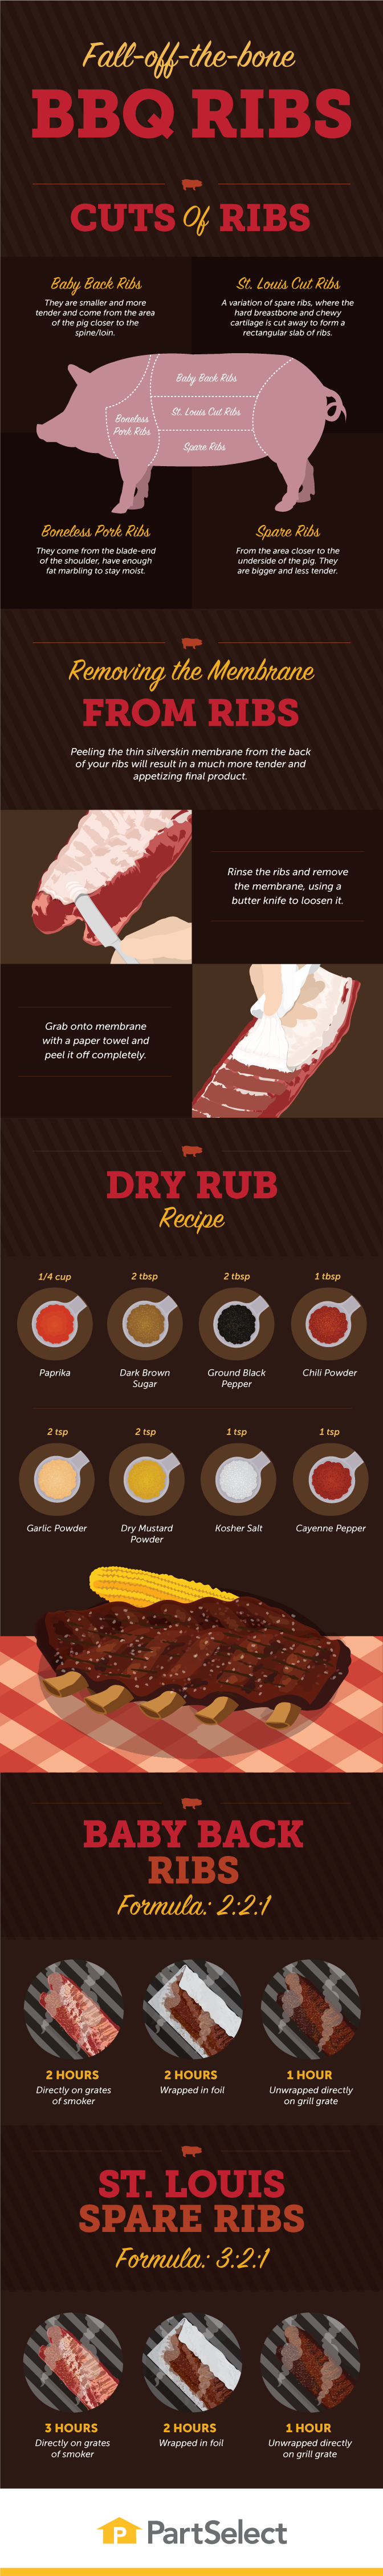 grilling ribs infographic